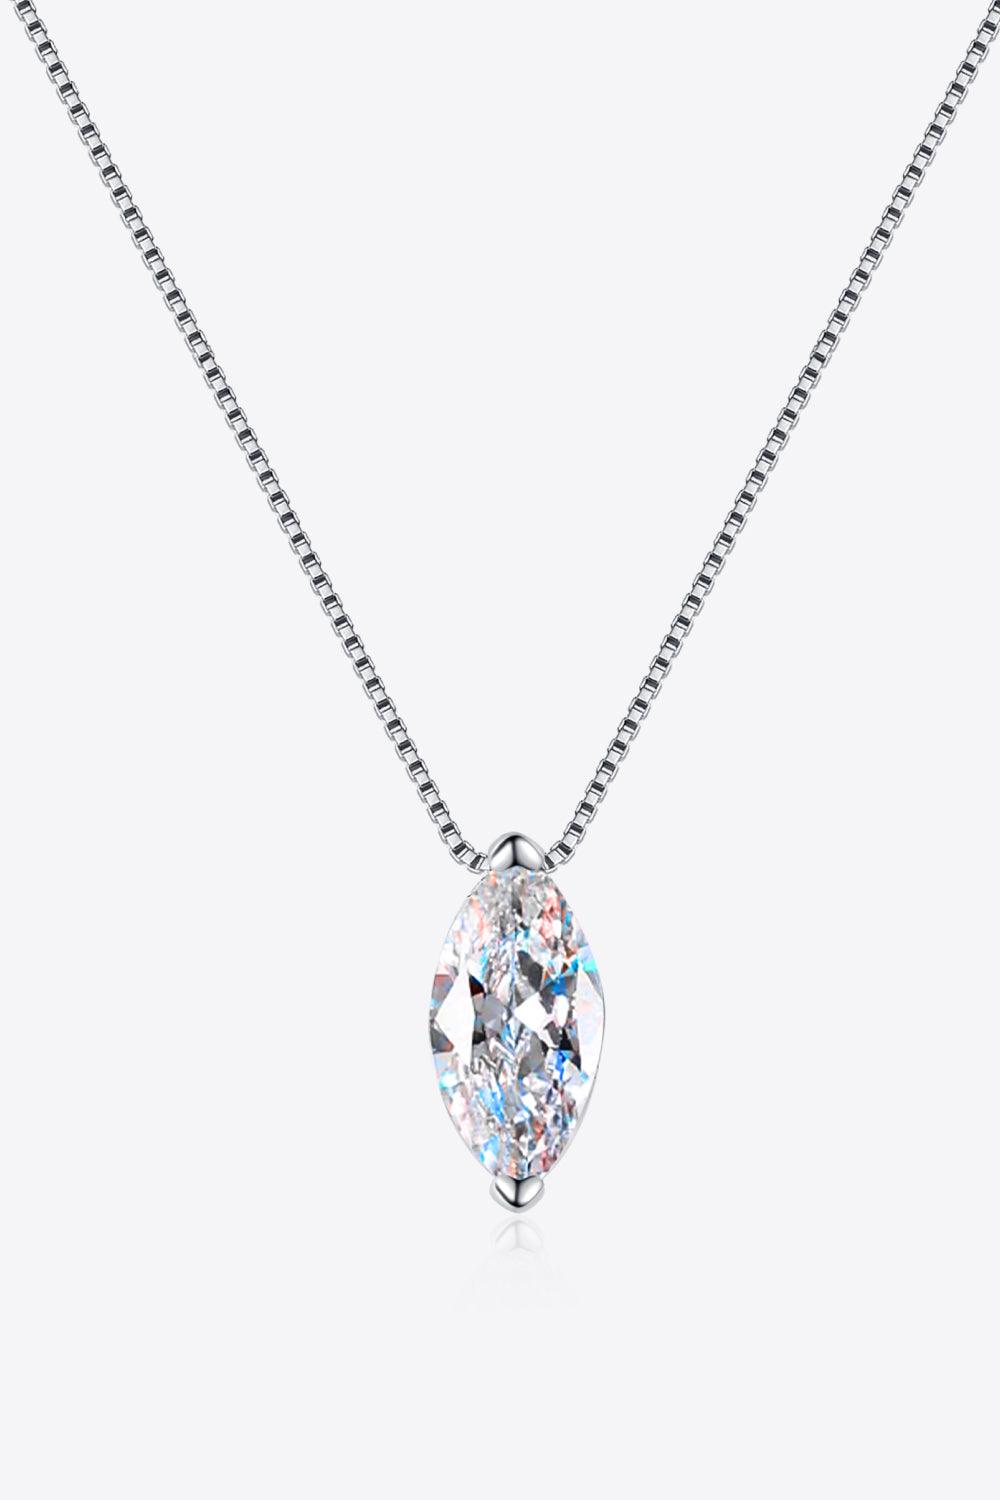 1 Carat Moissanite 925 Sterling Silver Necklace - Lab Fashion, Home & Health